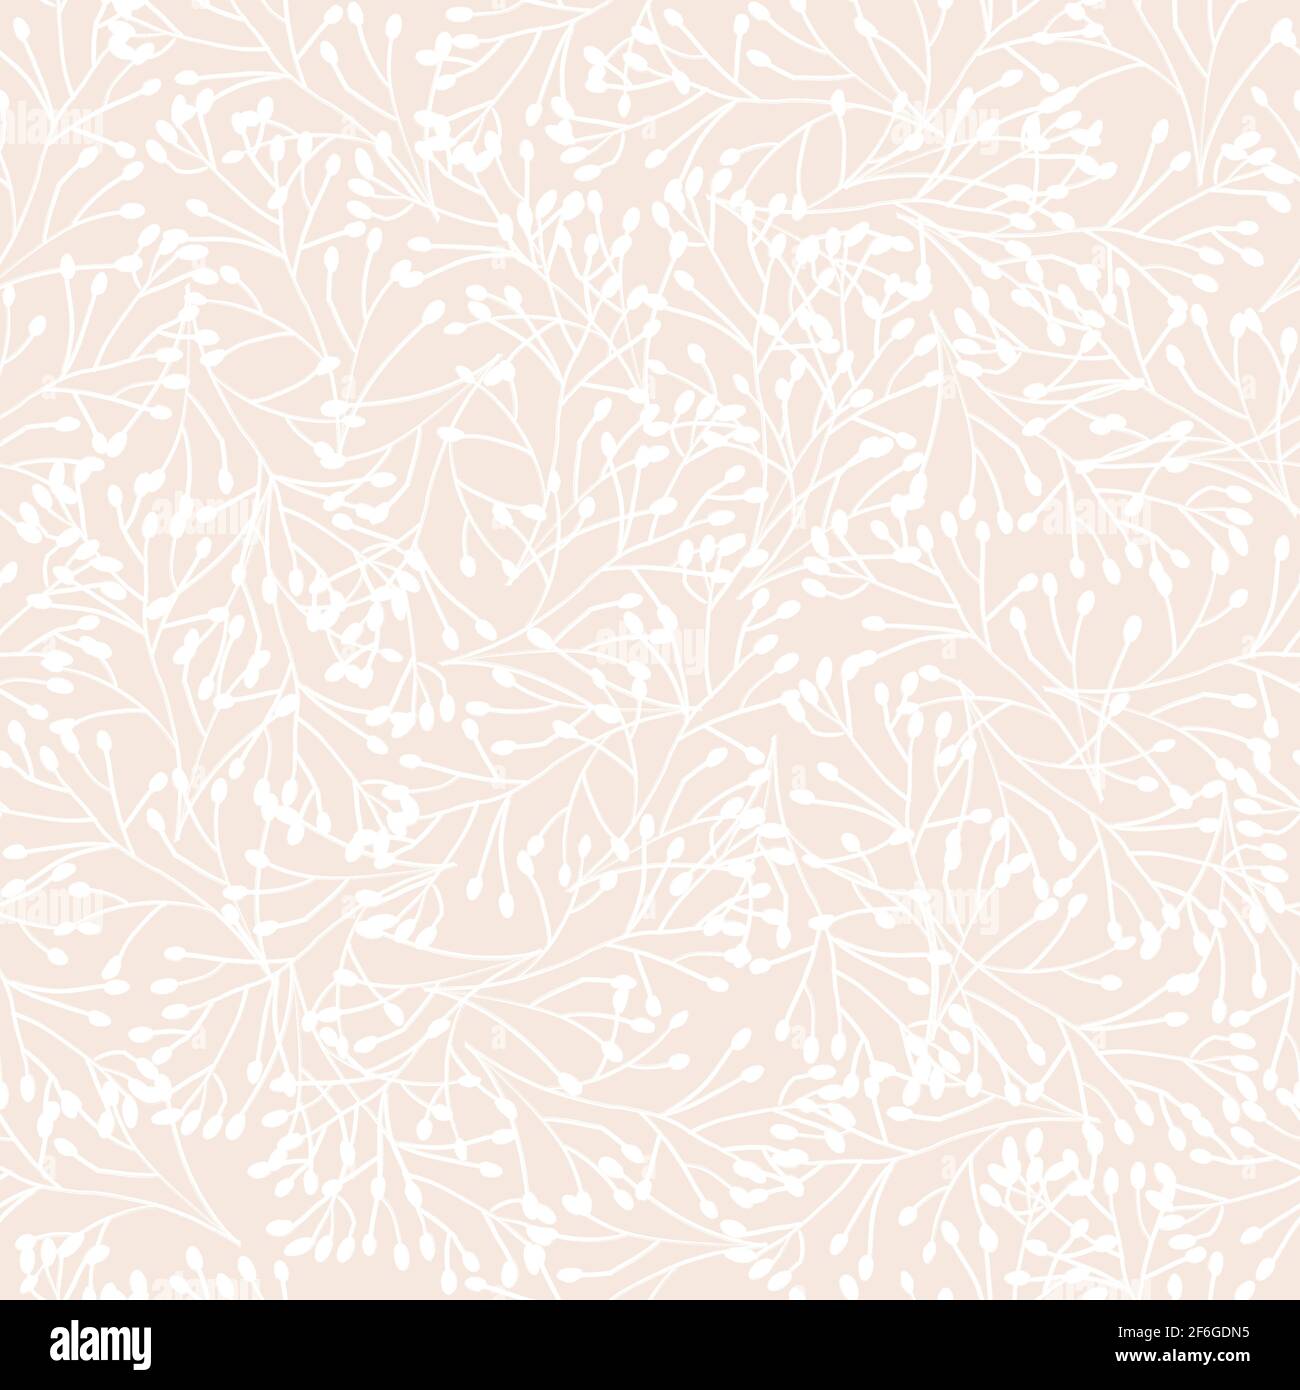 White beige seamless nature background from white hand drawn contour flowers. Repeating abstract nature texture for fabric, tiles, wallpaper. Dense Stock Photo